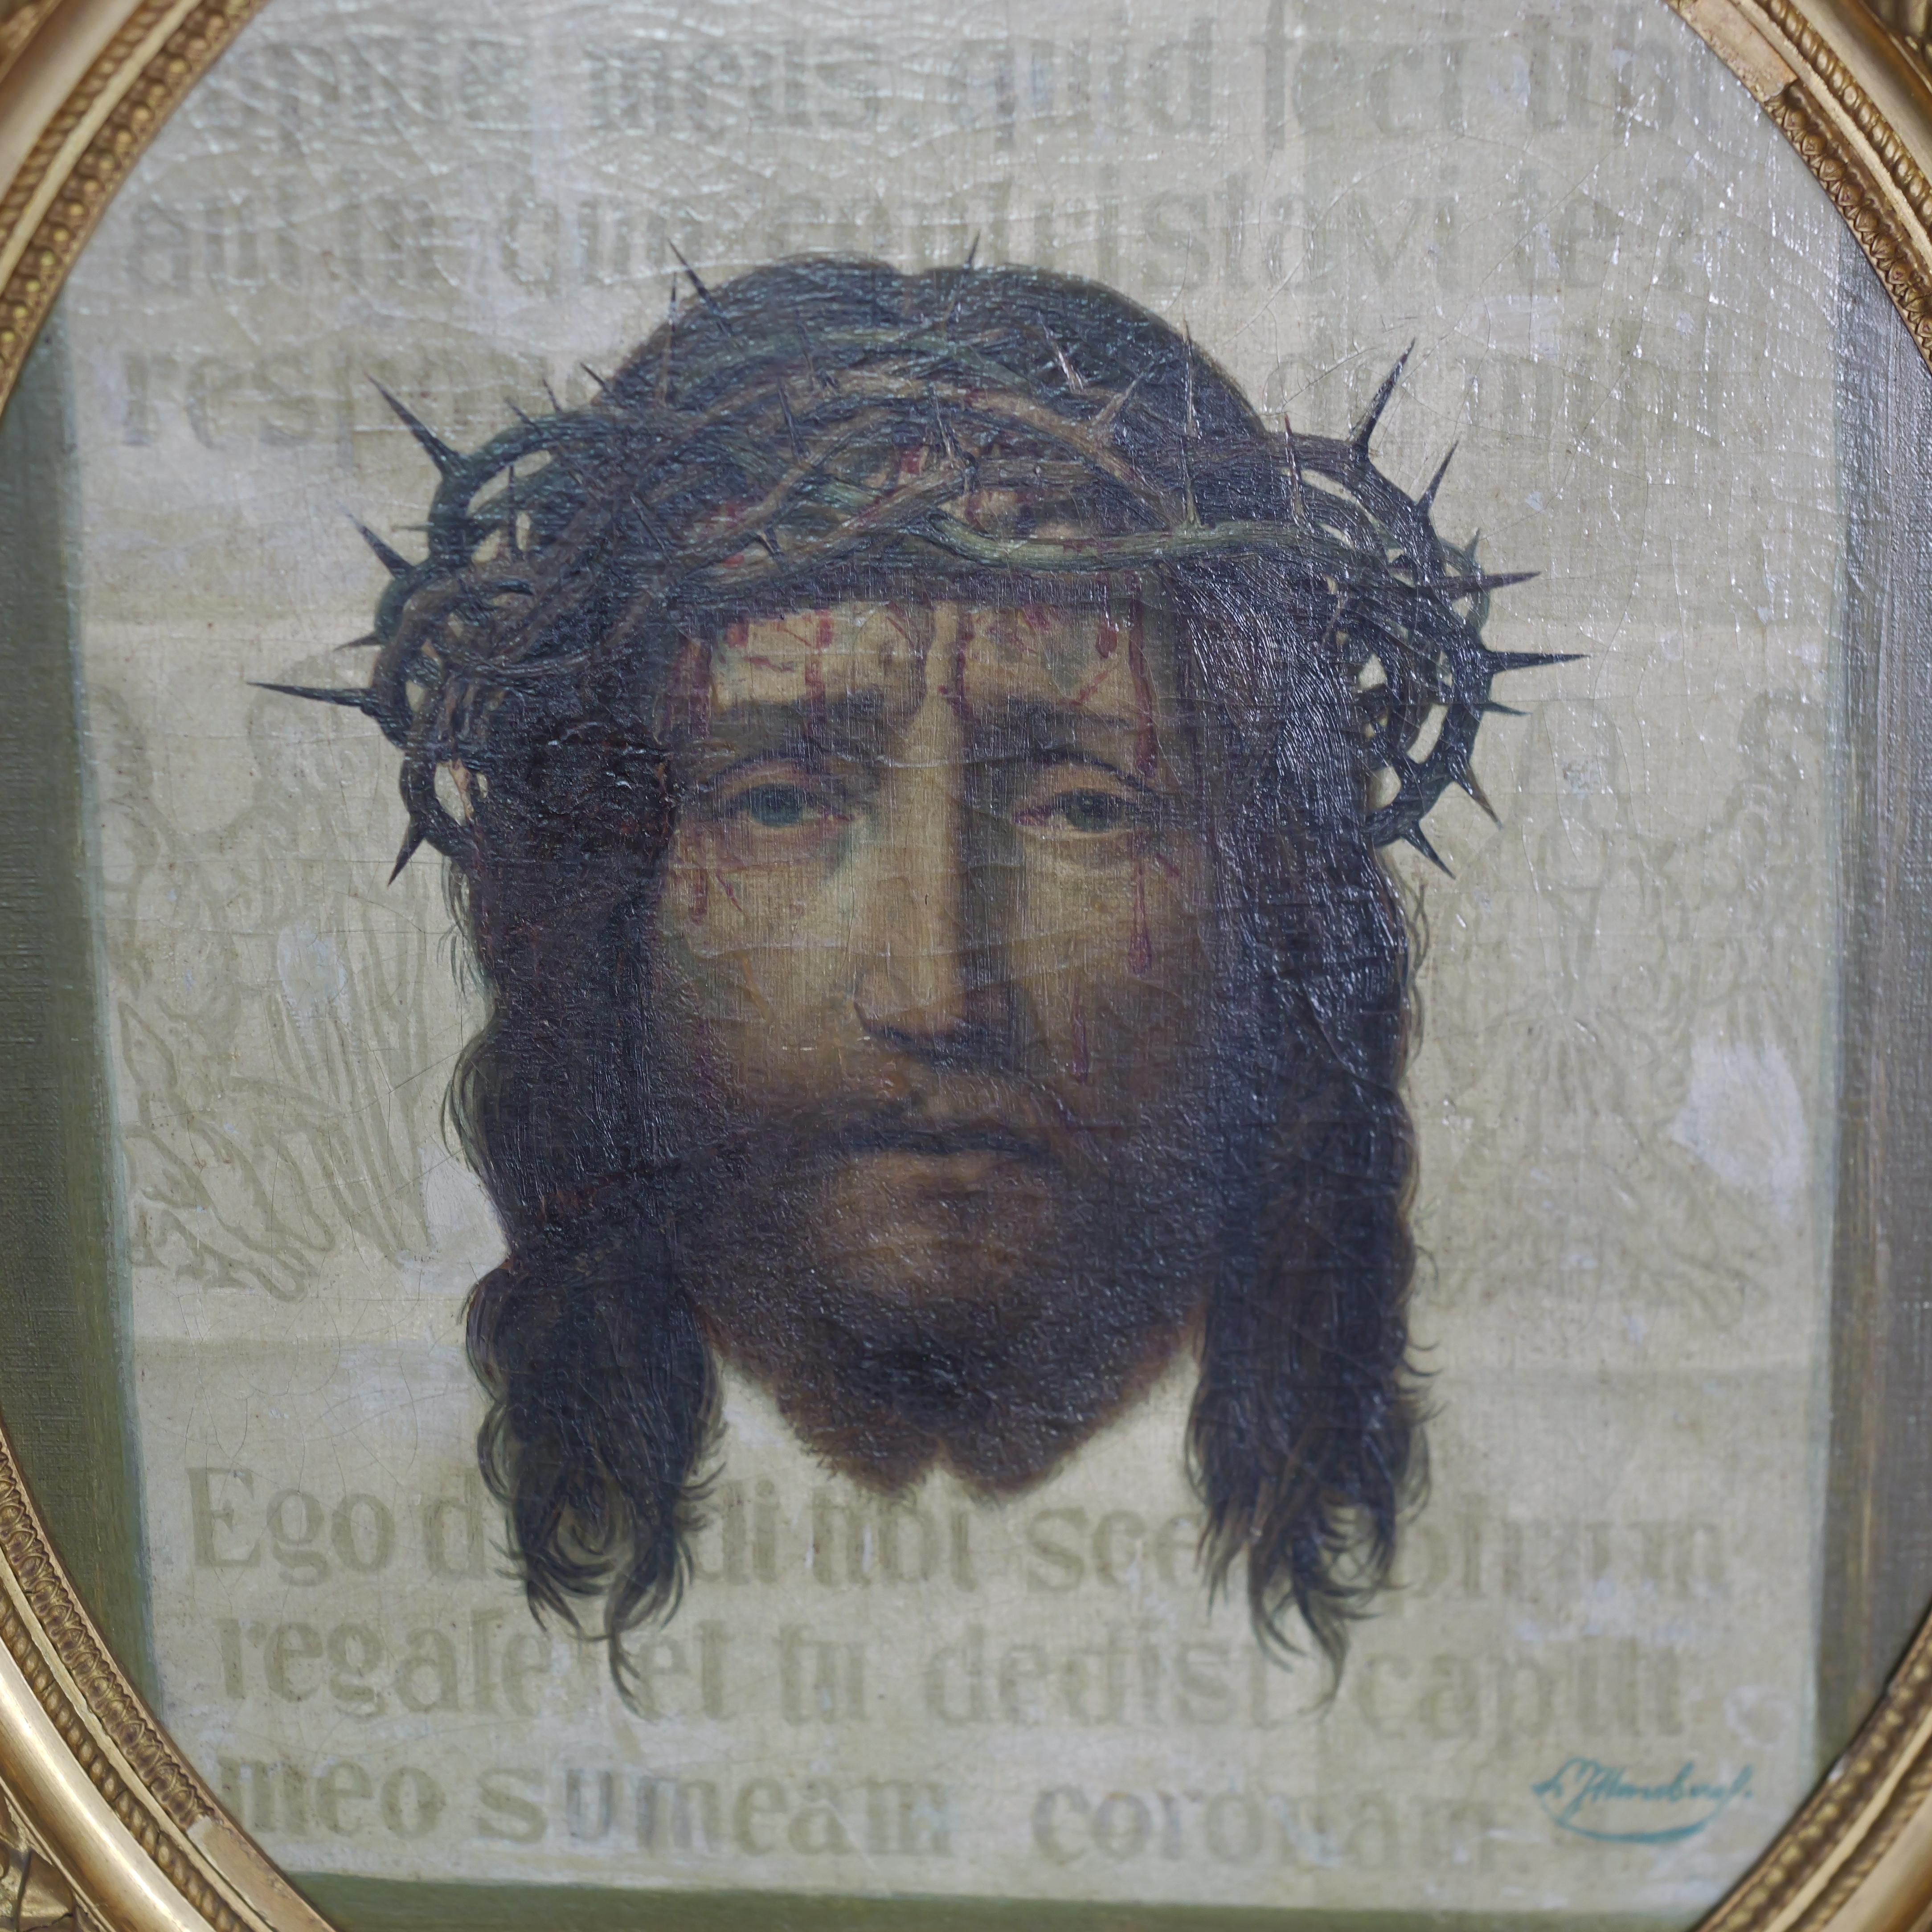 This stunning oil on canvas, mounted on panel, presents a detailed close-up of the face of Ecce Homo, a depiction of Jesus Christ during his trial before Pontius Pilate. Painted by the talented German artist Franz Ittenbach (1813-1879), known for